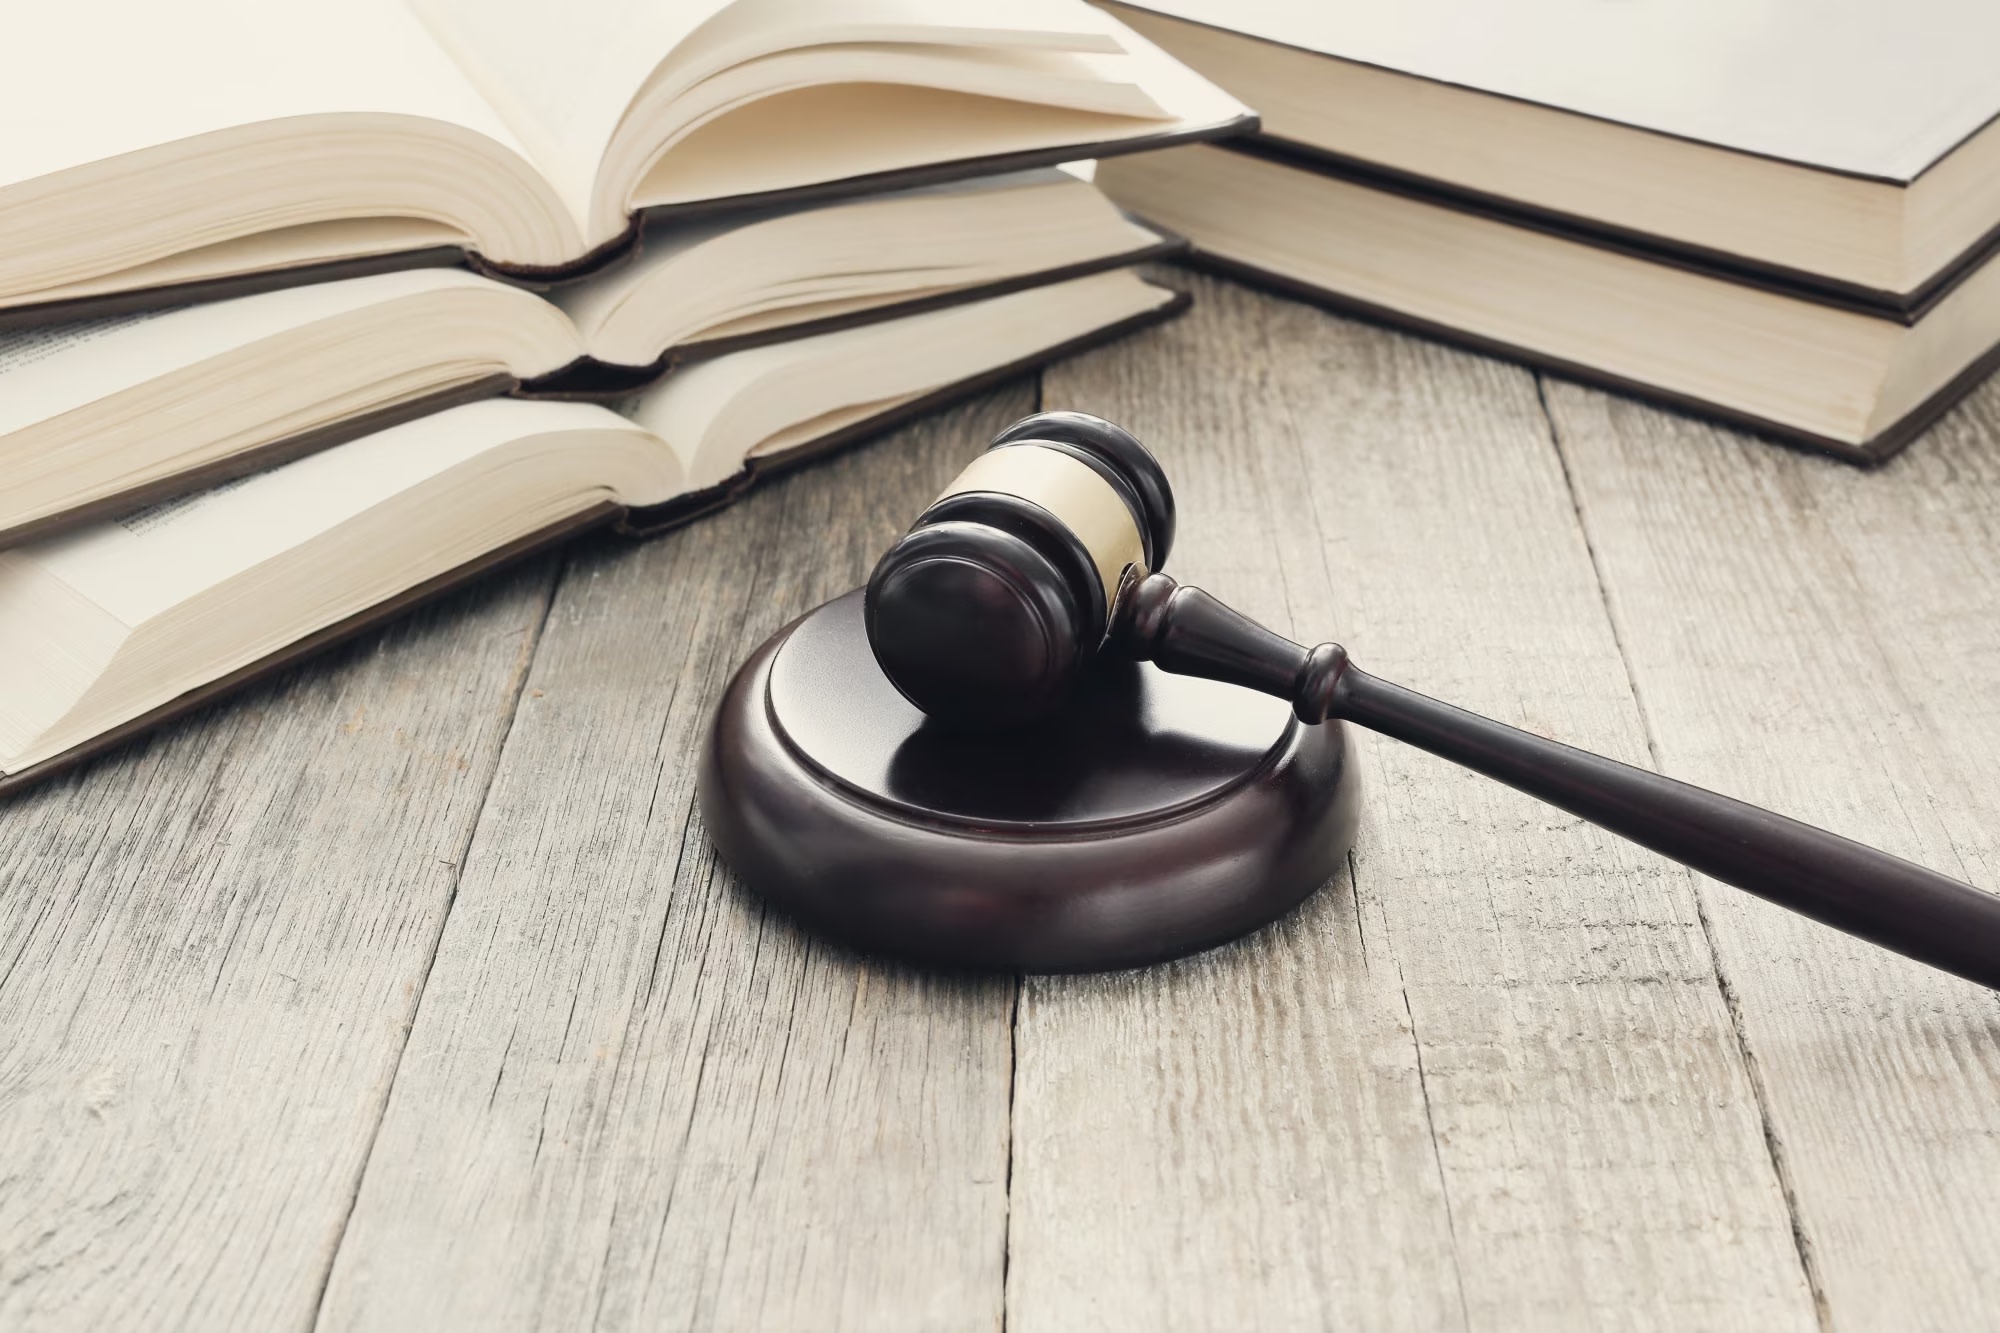 Image of courtroom gavel resting on wooden table with legal books